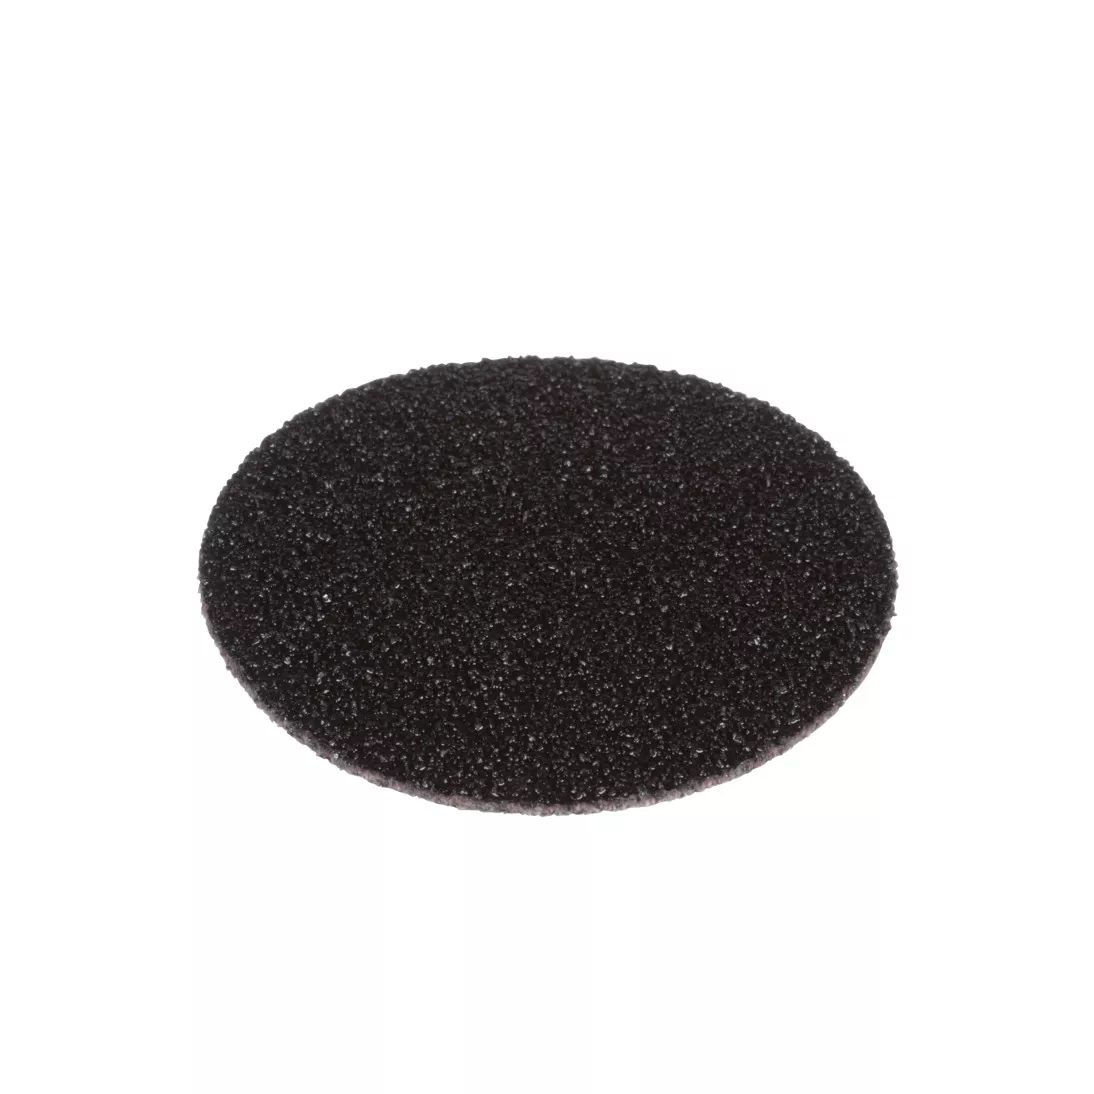 Standard Abrasives™ Quick Change Silicon Carbide 2 Ply Disc, 522416, 50,
TSM, Black, 2 in, Die QS200PM, 50/inner, 200/case